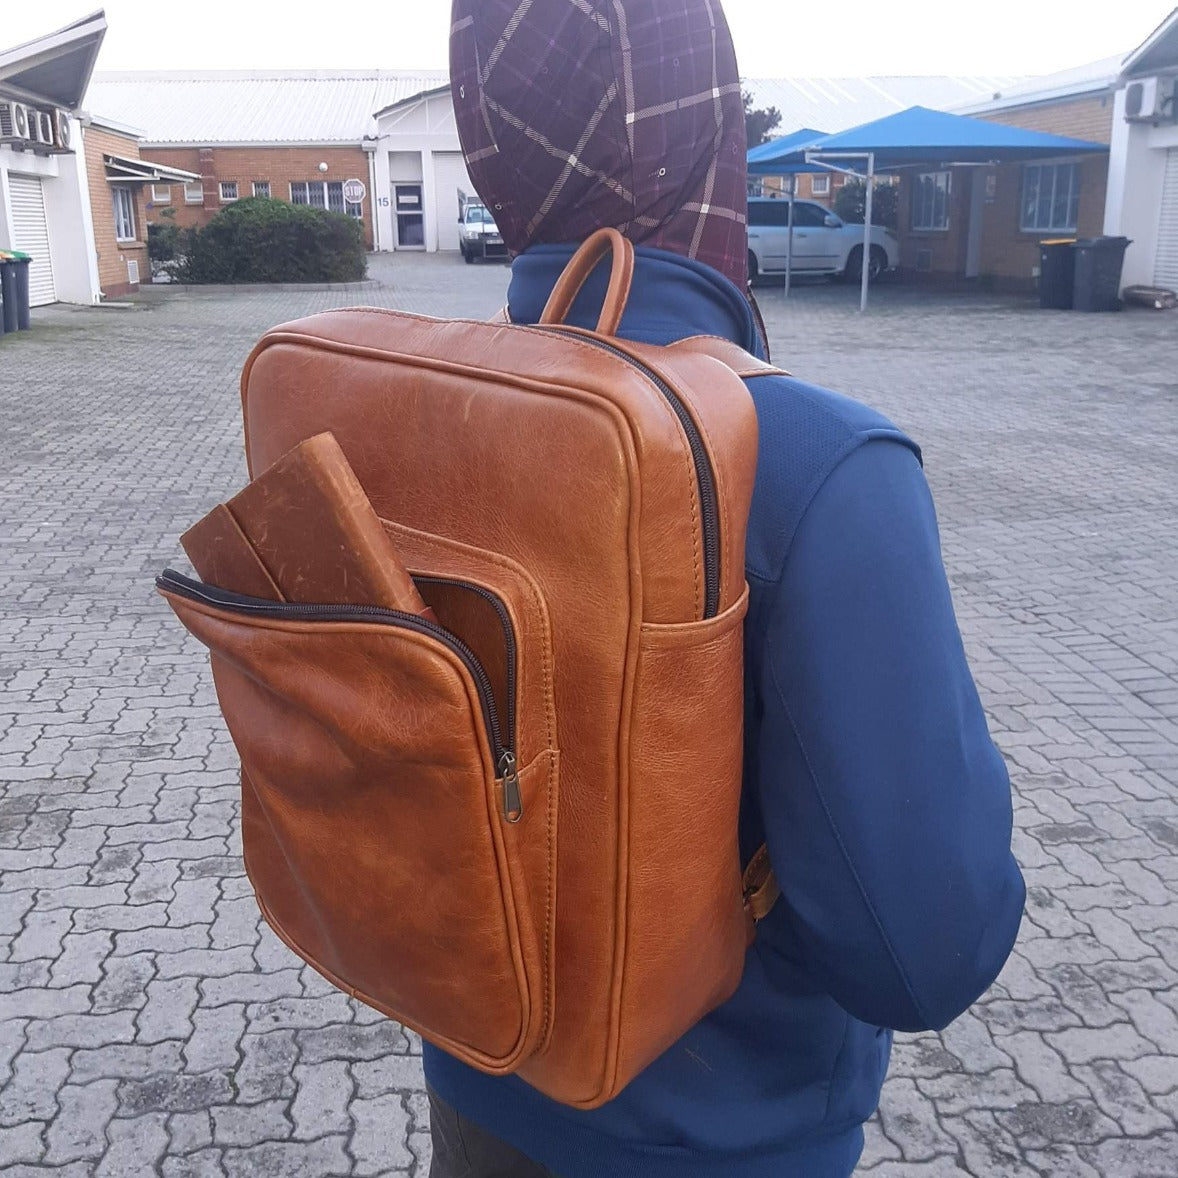 A boy carrying Everyday Laptop Backpacks 15" in light tan colour from Cape Masai Leather 